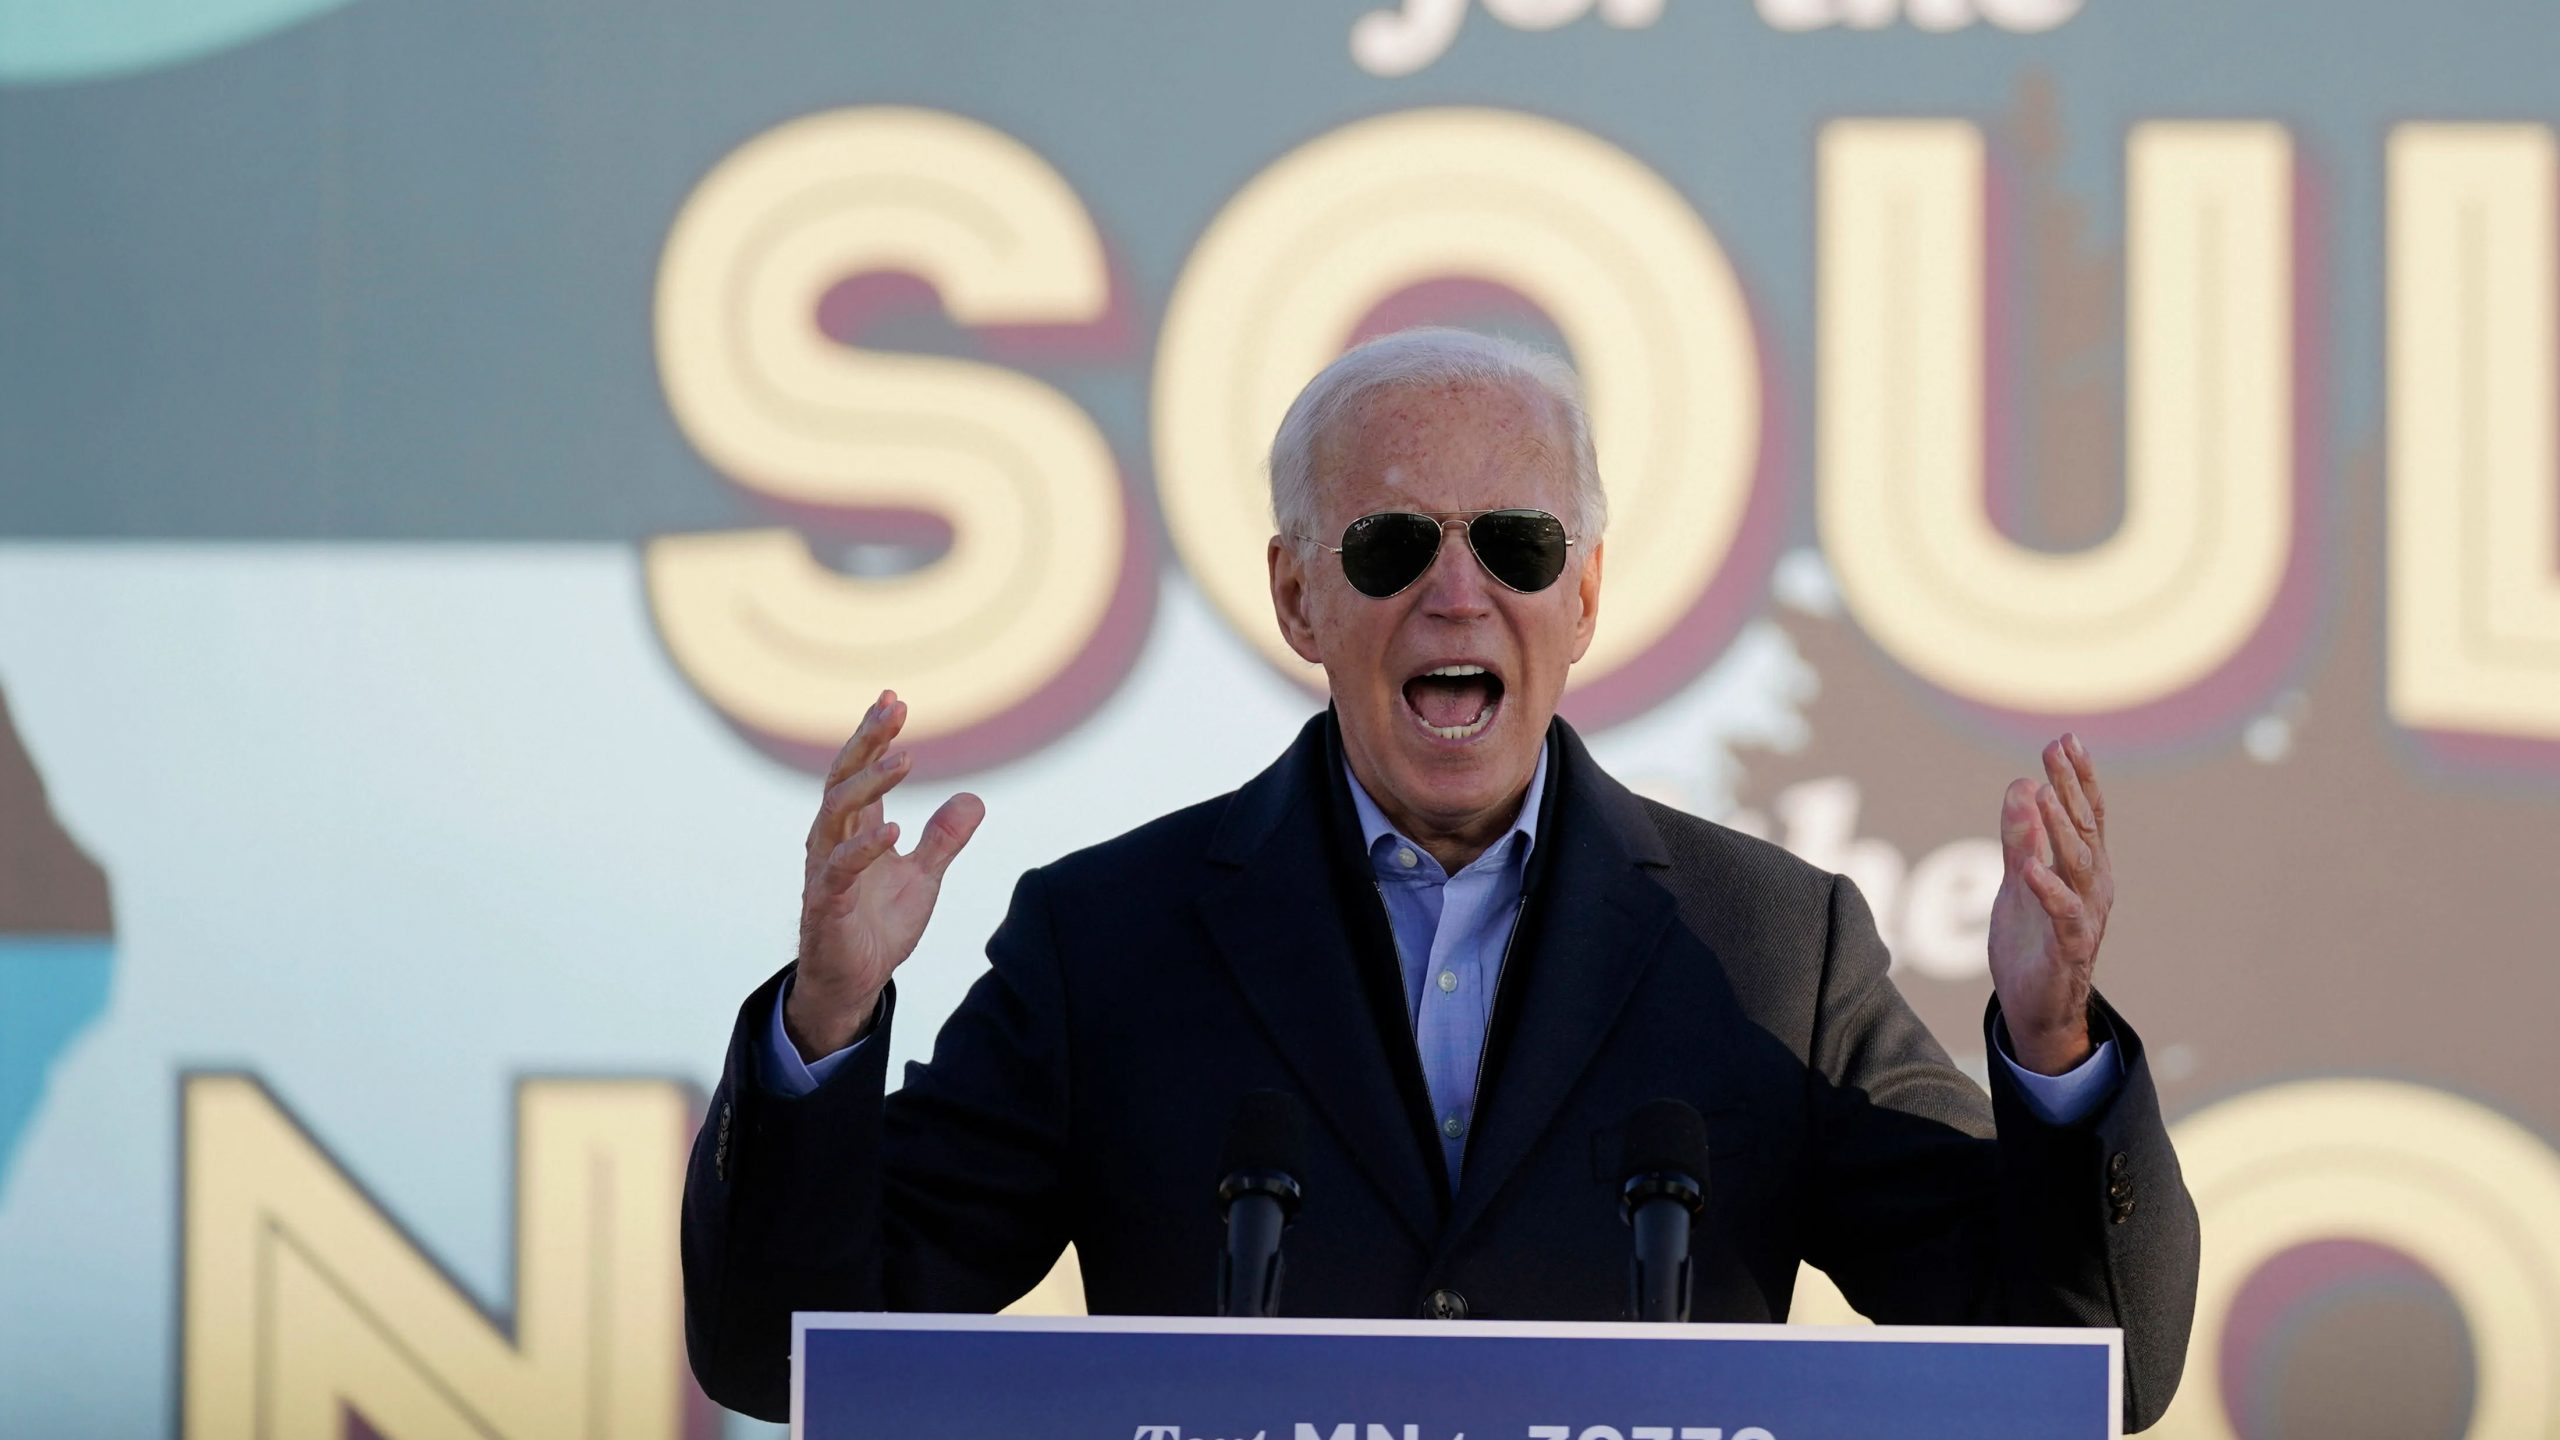 Joe Biden has won more votes than any presidential candidate in the US history